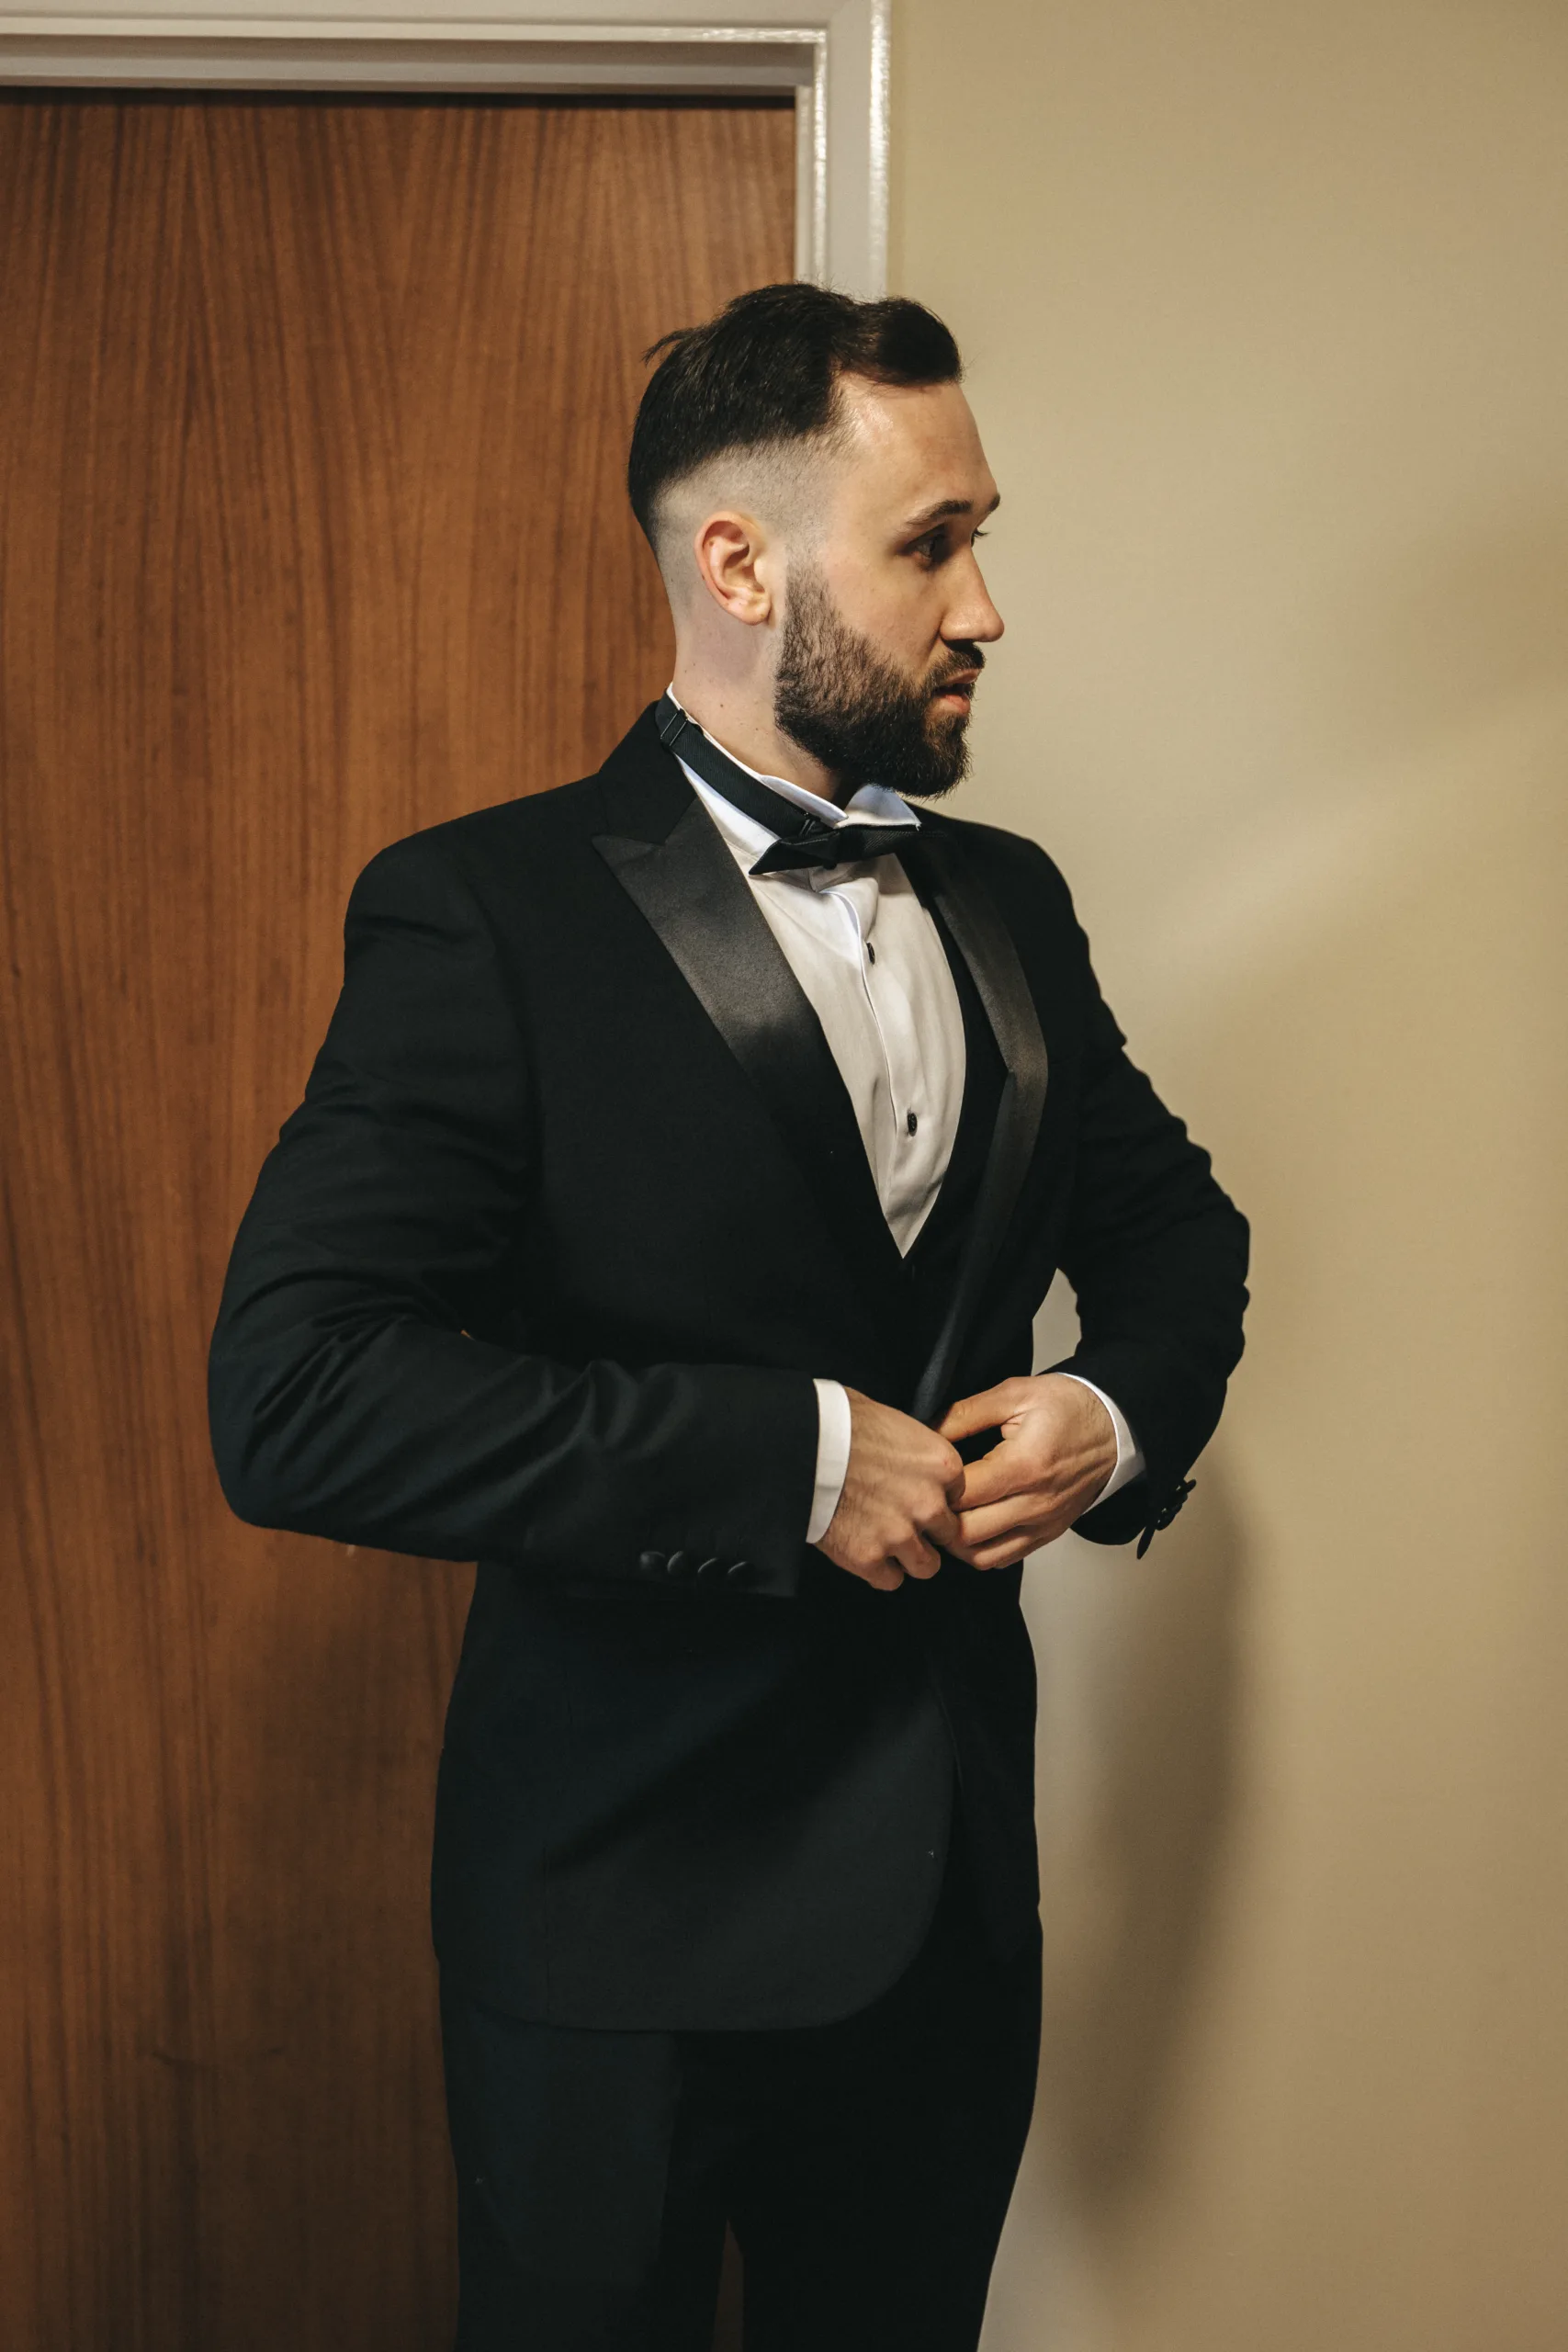 A man in a tuxedo is standing in front of a door, posing for the photographer.